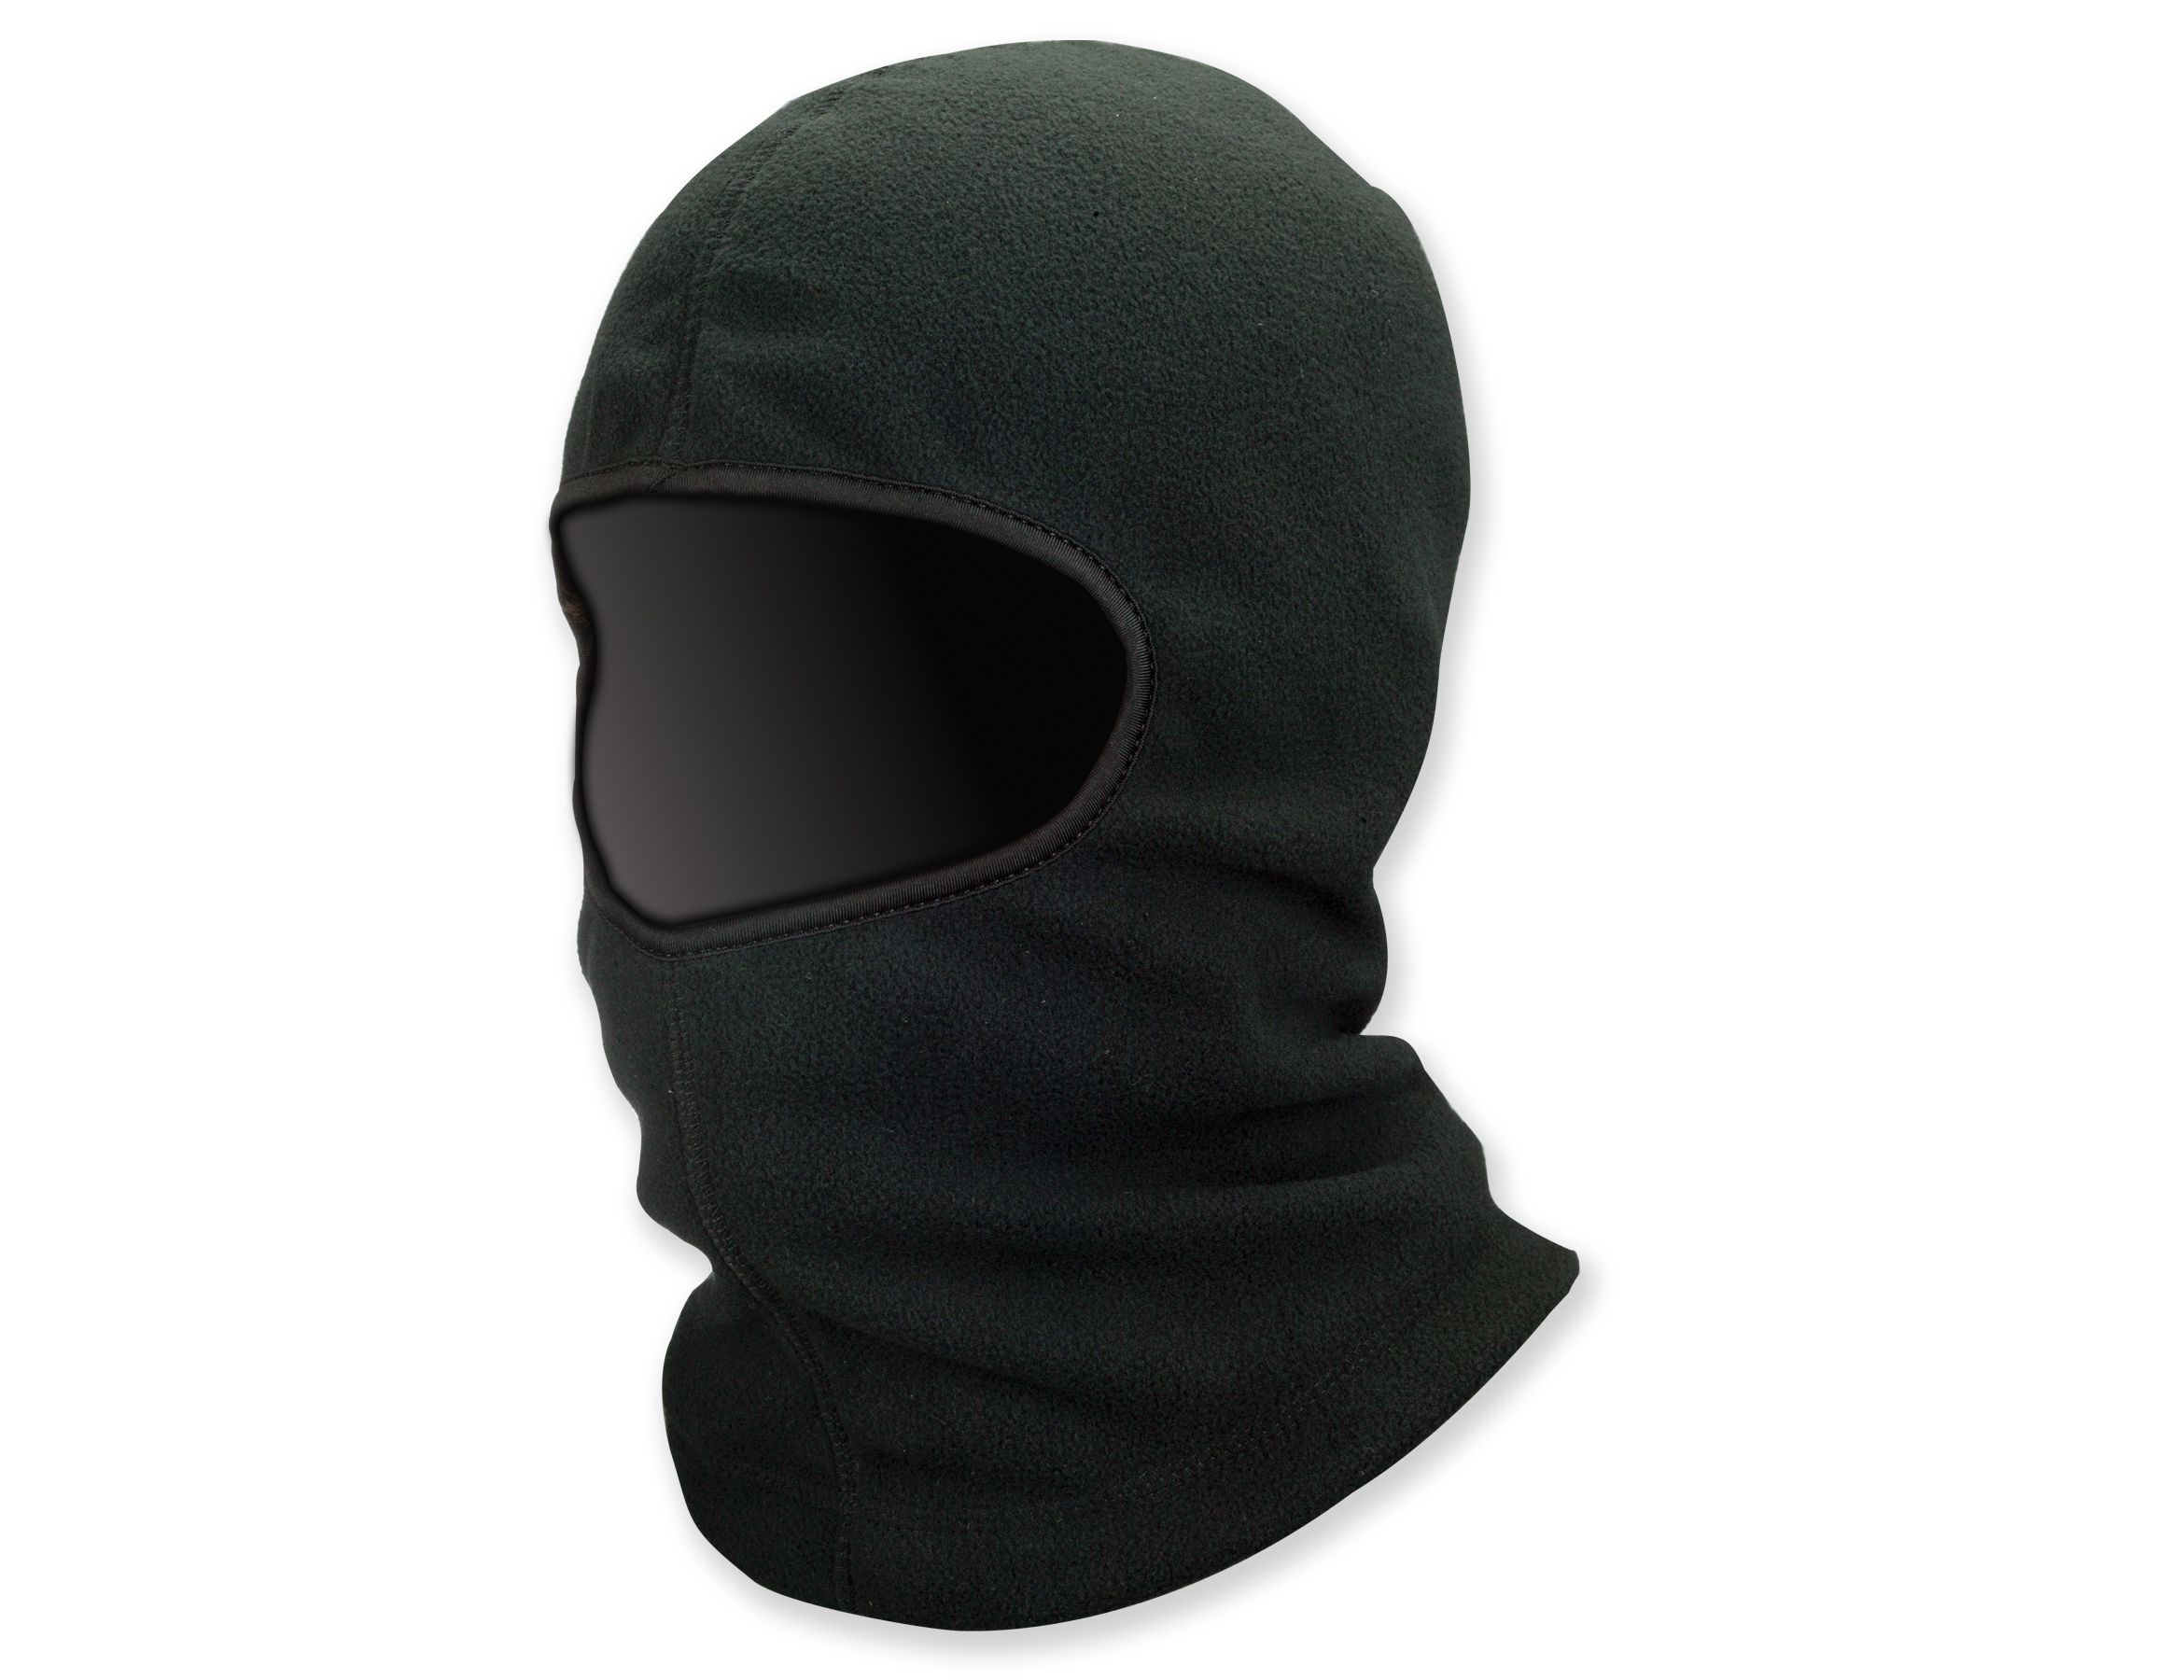 Winter Warm Thermal Balaclava Cold Weather Hat Helmet Liner Full Face Cover Cap 